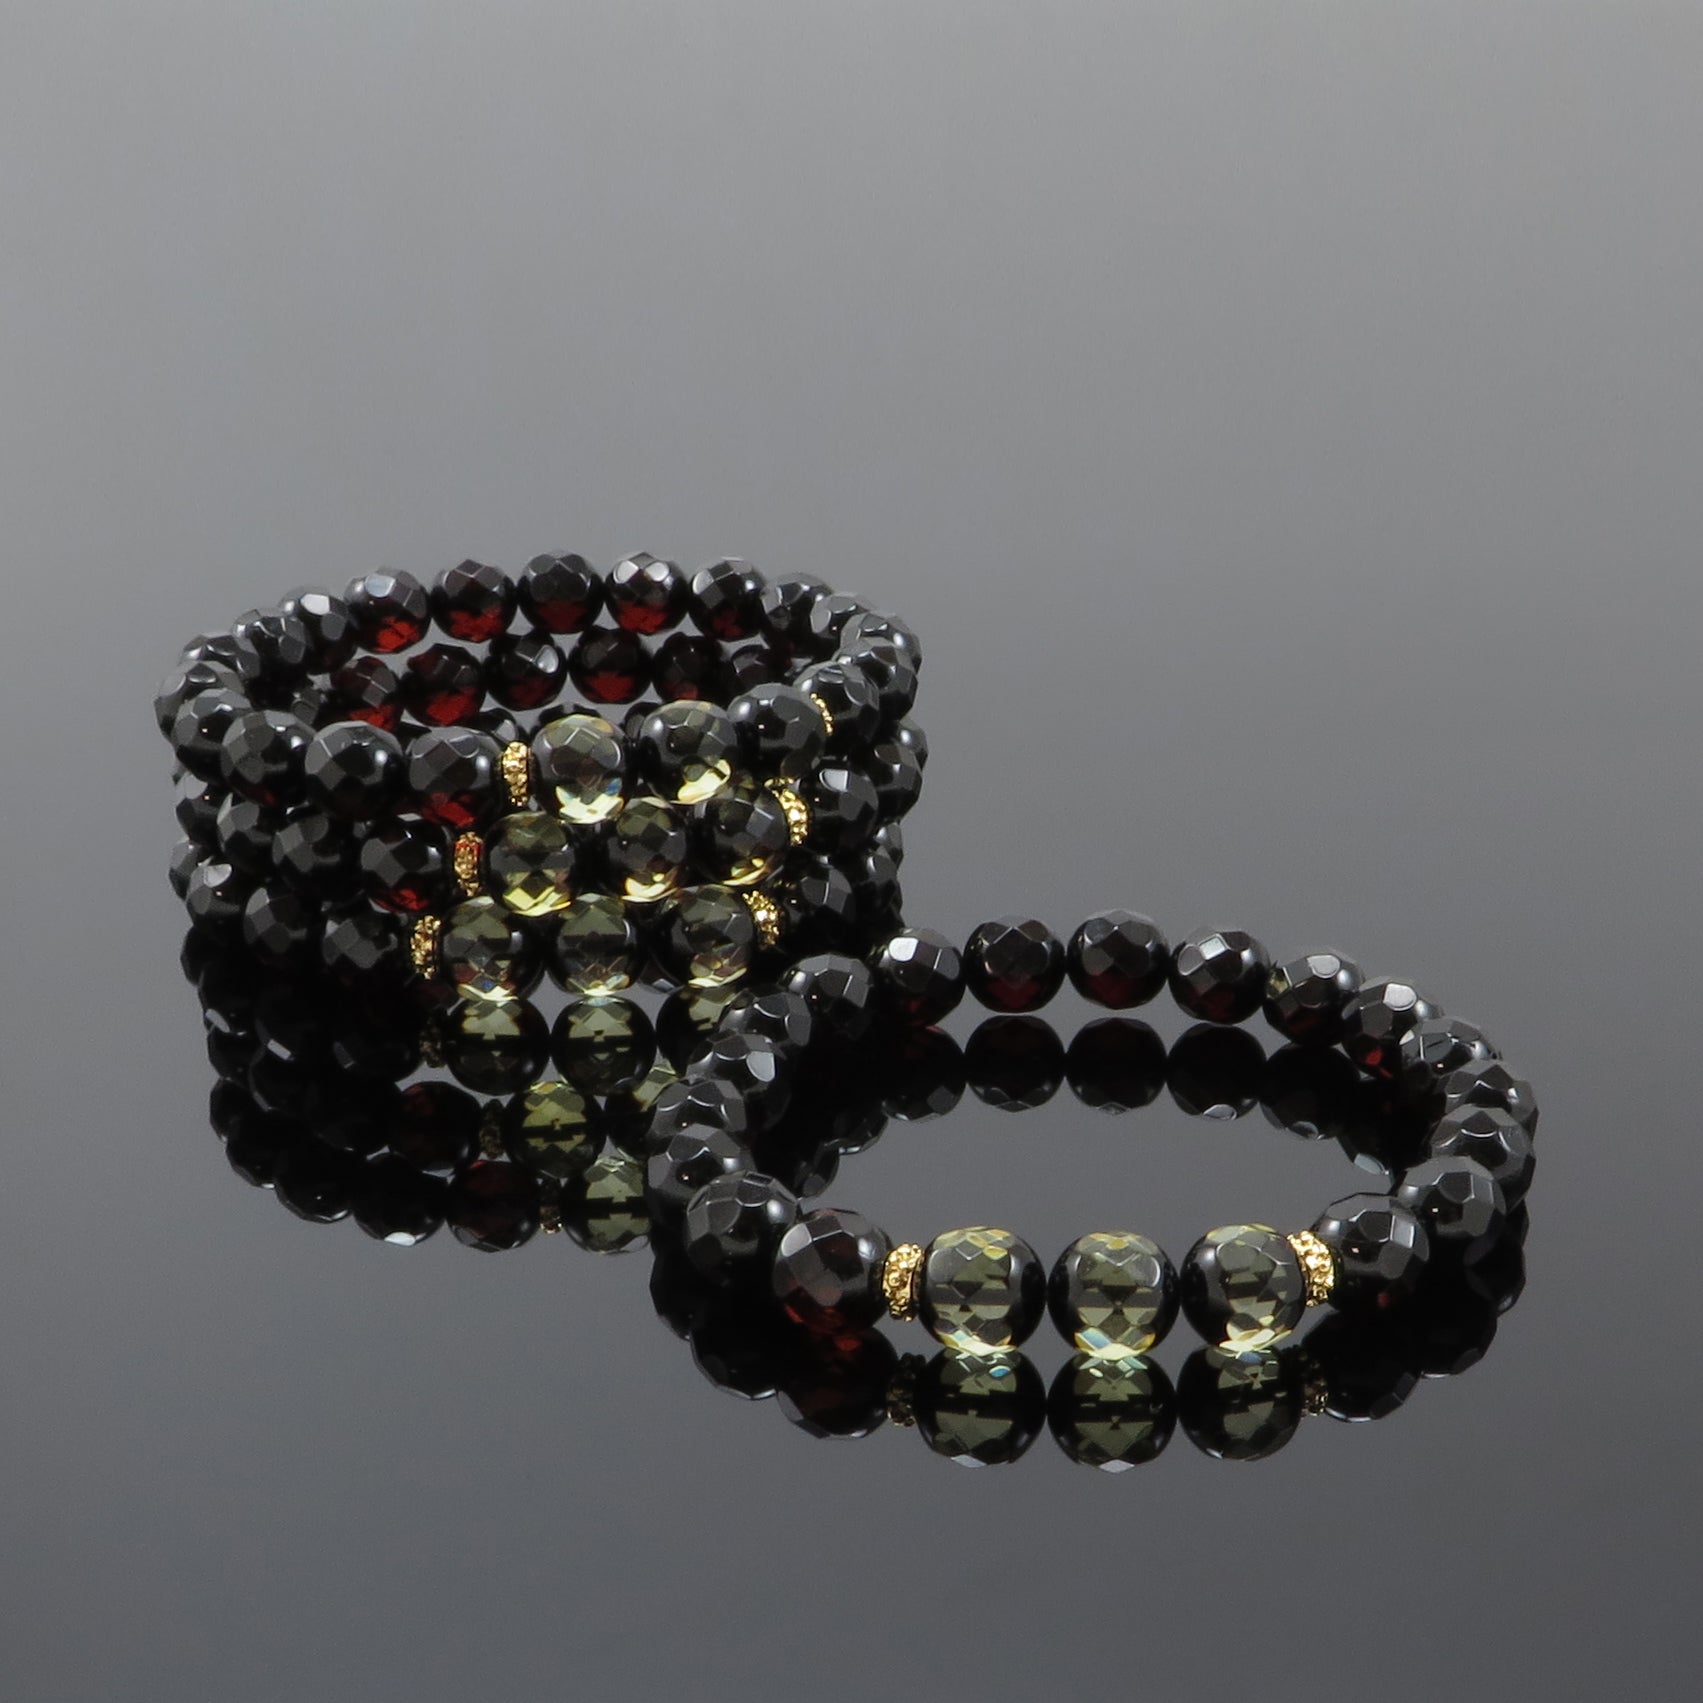 Cherry Amber Faceted Round Beads Stretch Bracelet